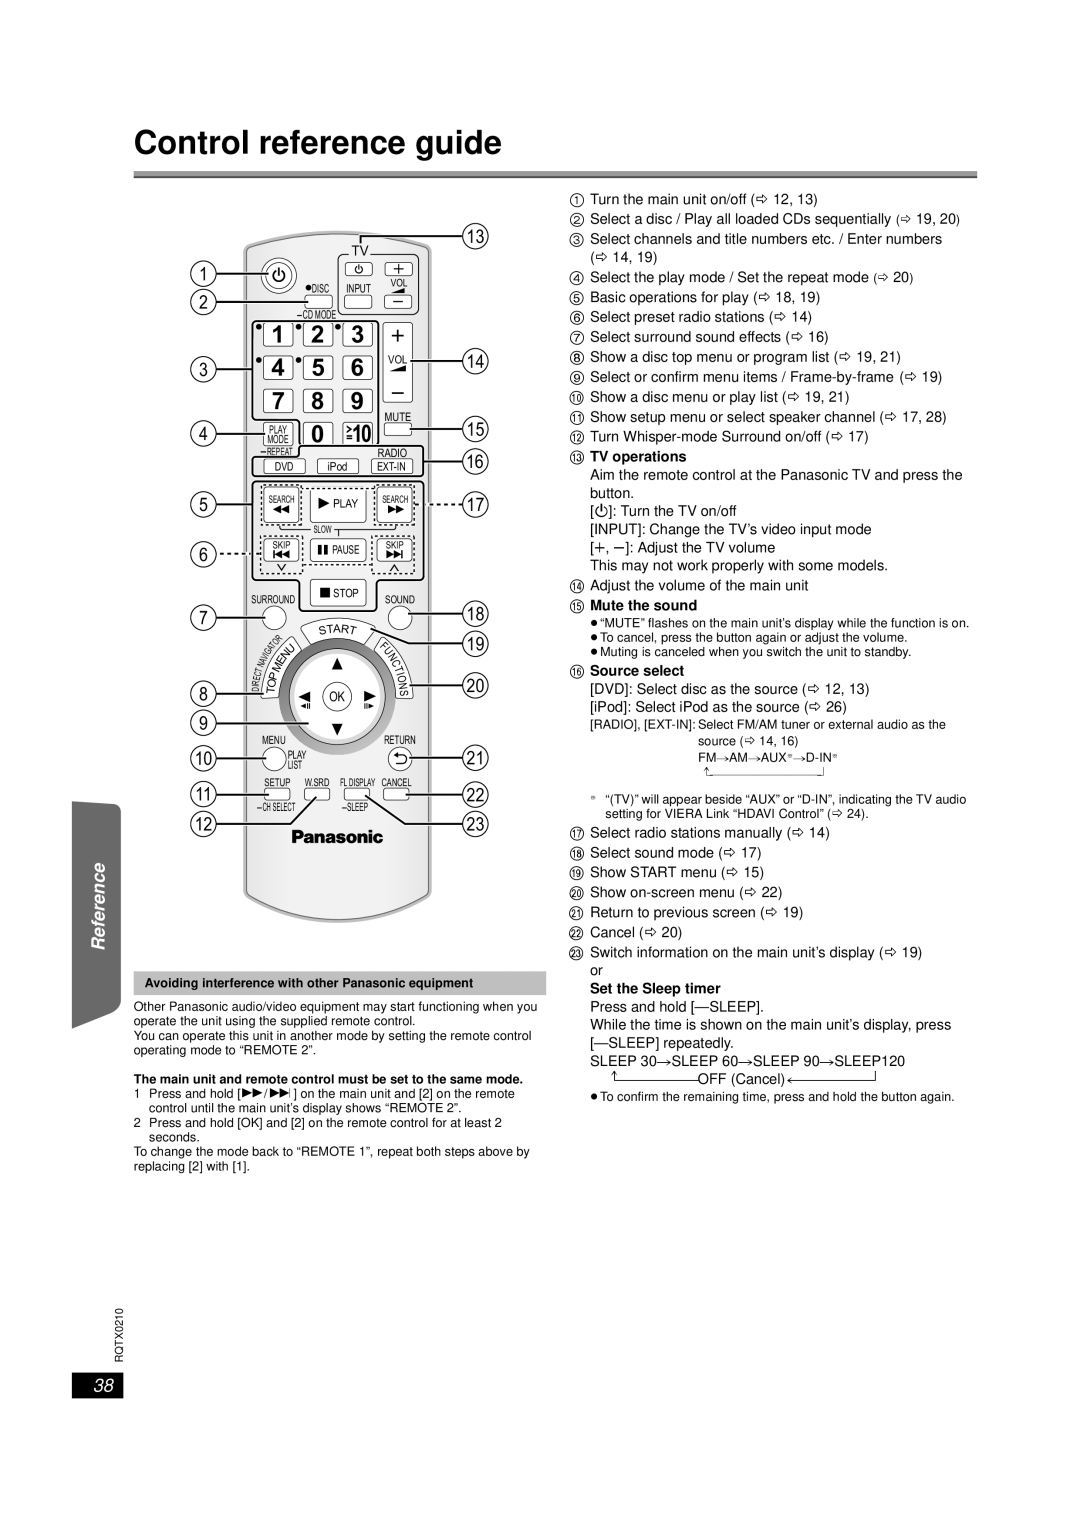 Panasonic SC-PT670 Control reference guide, = TV operations, @Source select, Set the Sleep timer Press and hold -SLEEP 